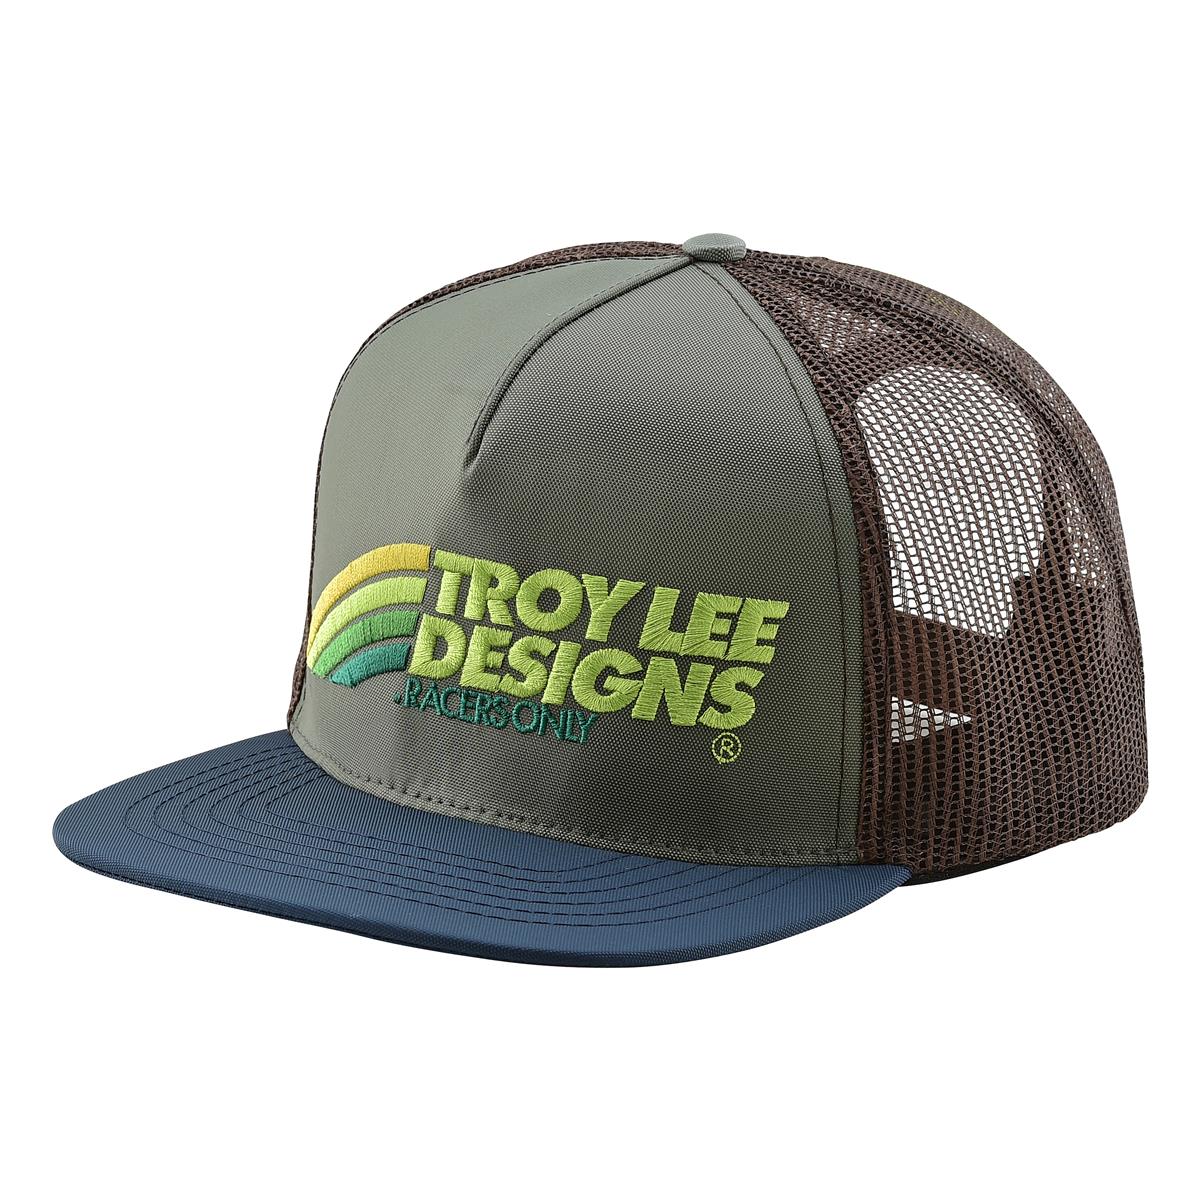 Troy Lee Designs Casquette Snap Back Velo Green/Brown